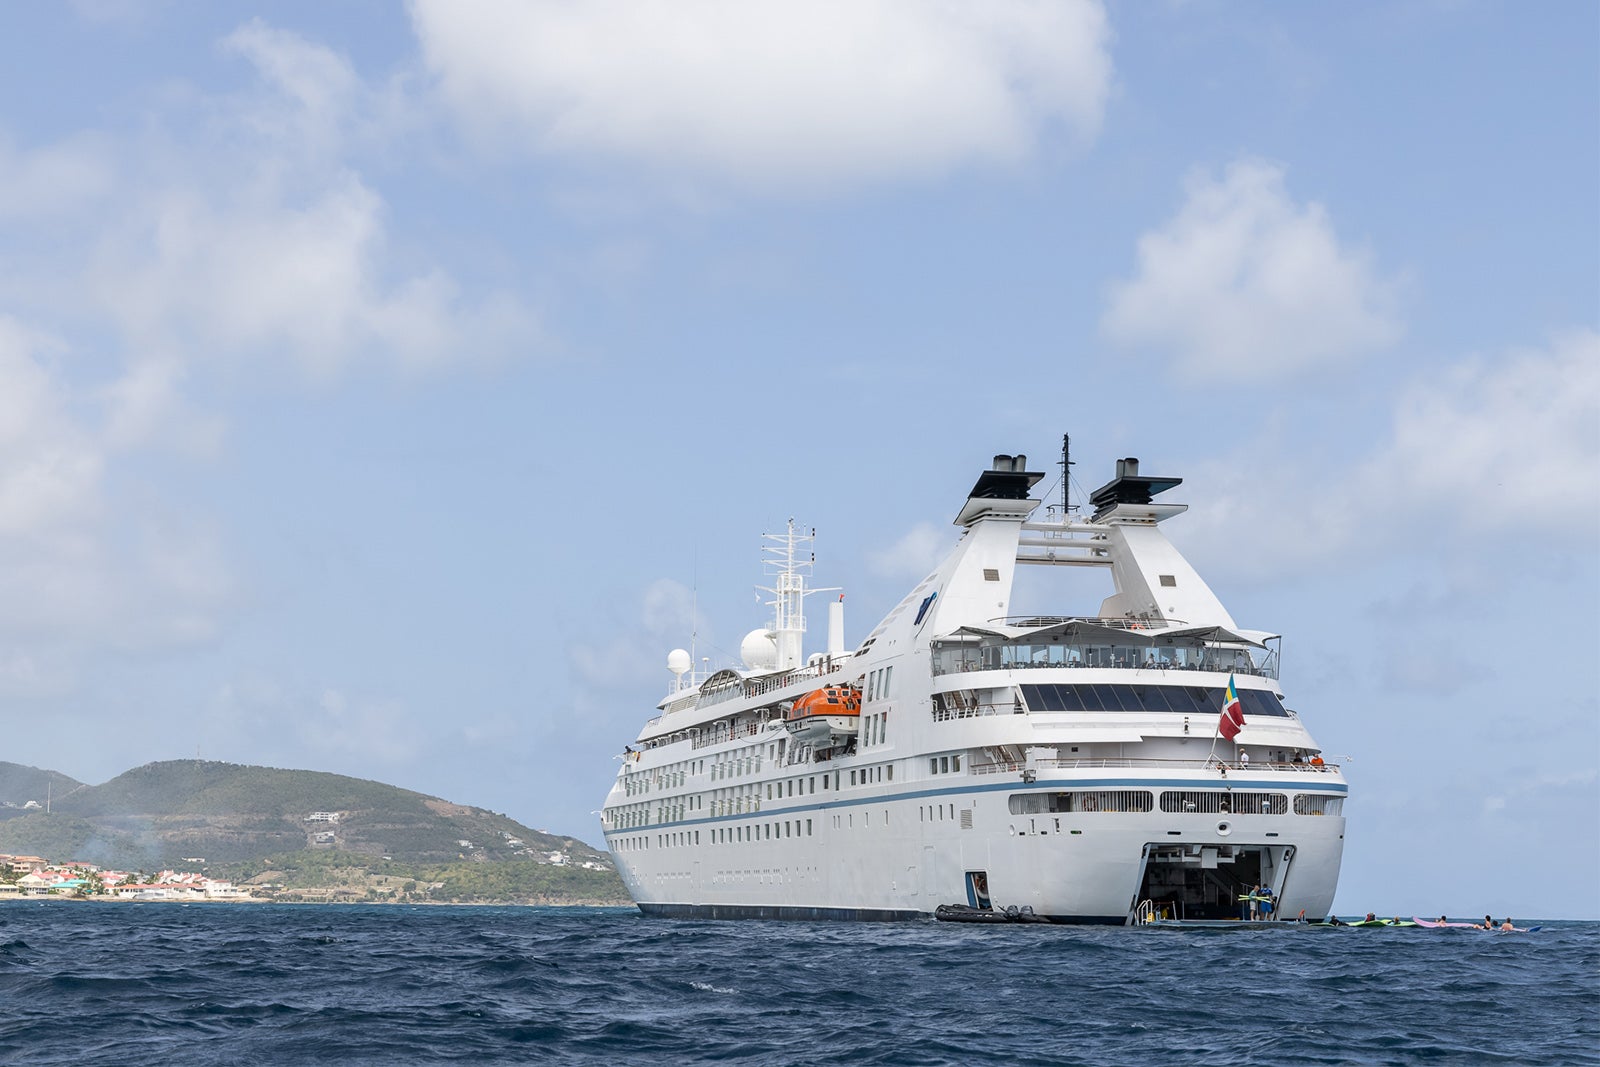 Star Breeze cruise ship with water sports platform deployed.